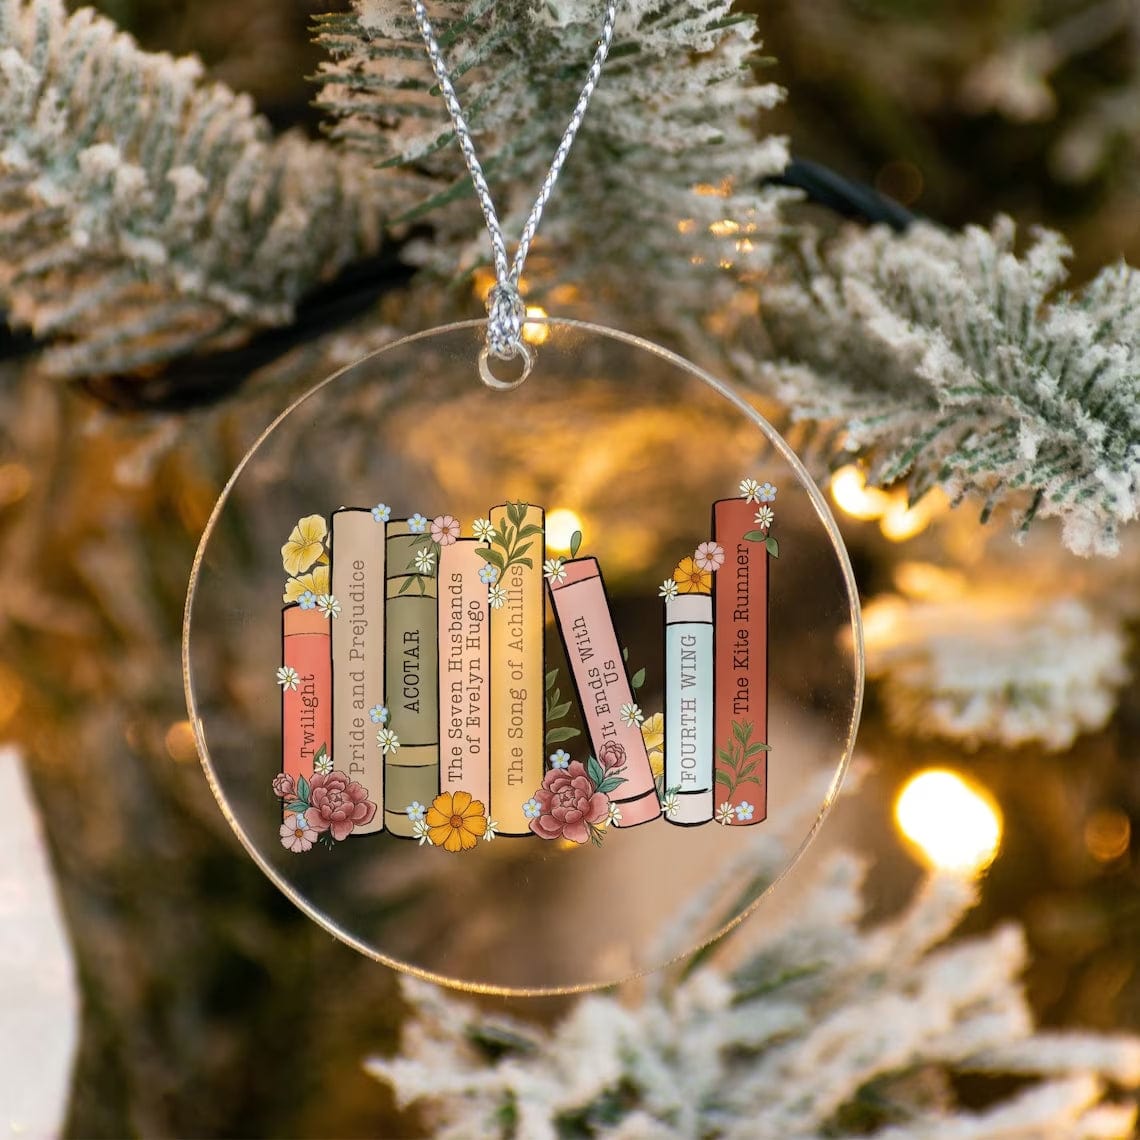 Personalization Book's Name Christmas Tree Ornament, Banned Book Ornament, Gift for Book Lovers